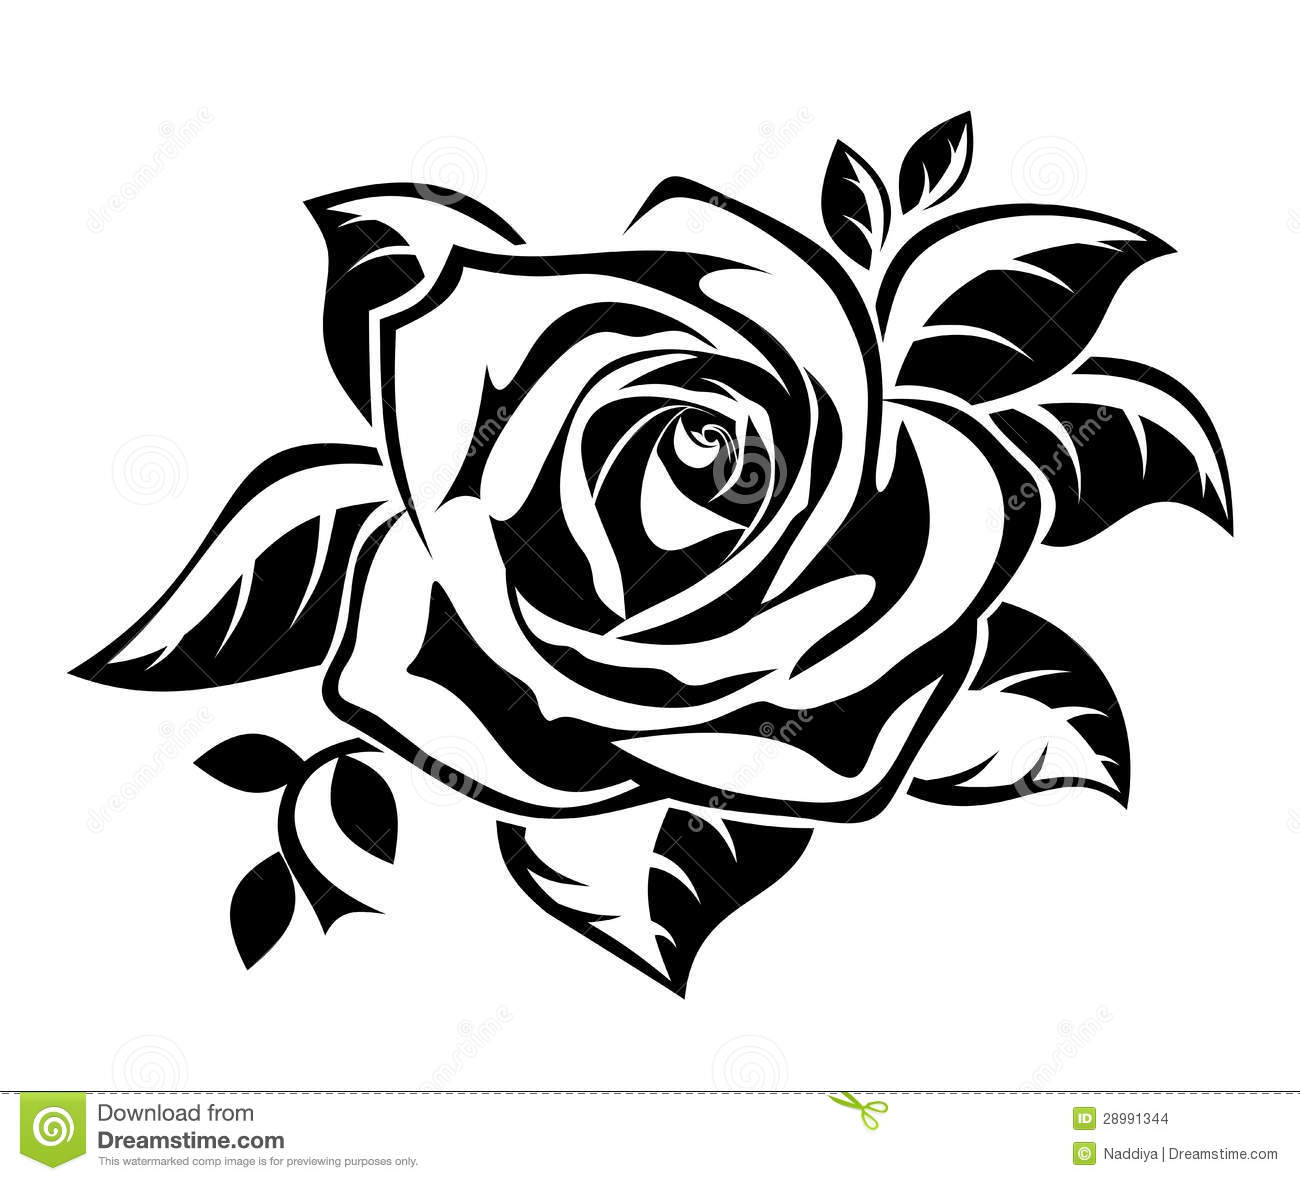 Vector Illustration Of Black Silhouette Of Rose With Leaves On A White